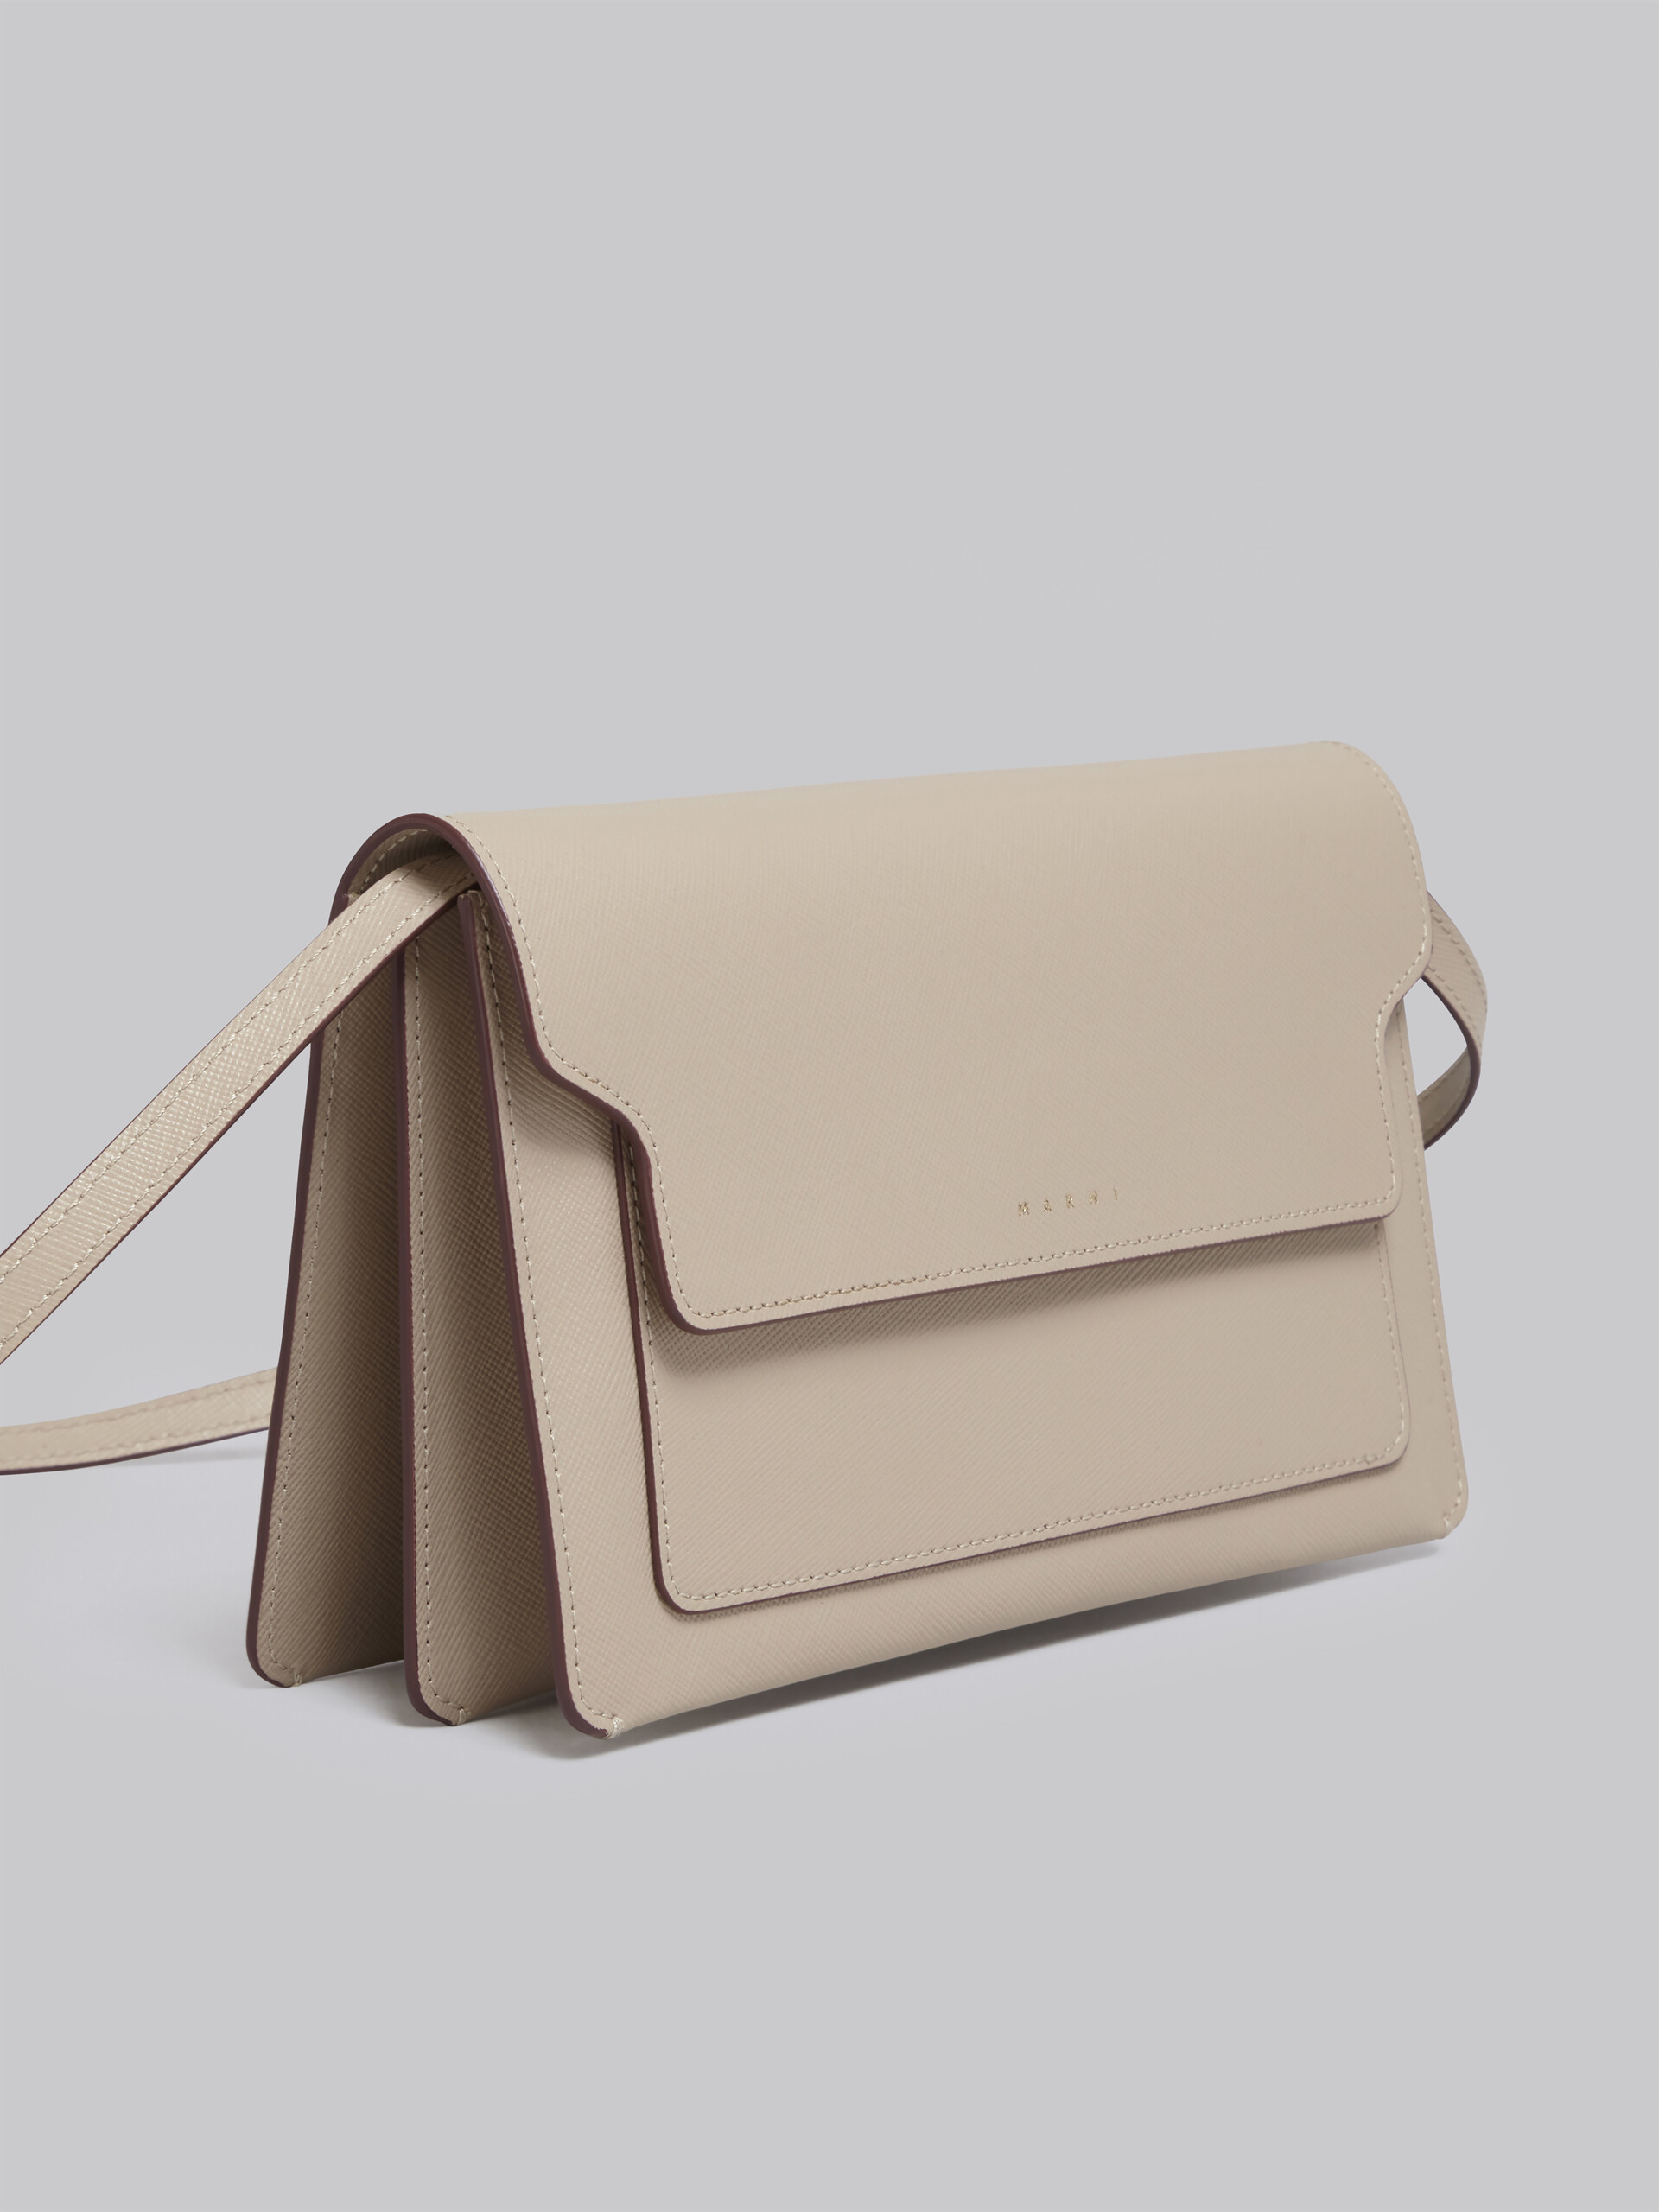 TRUNK clutch bag in beige saffiano leather - Pochettes - Image 4